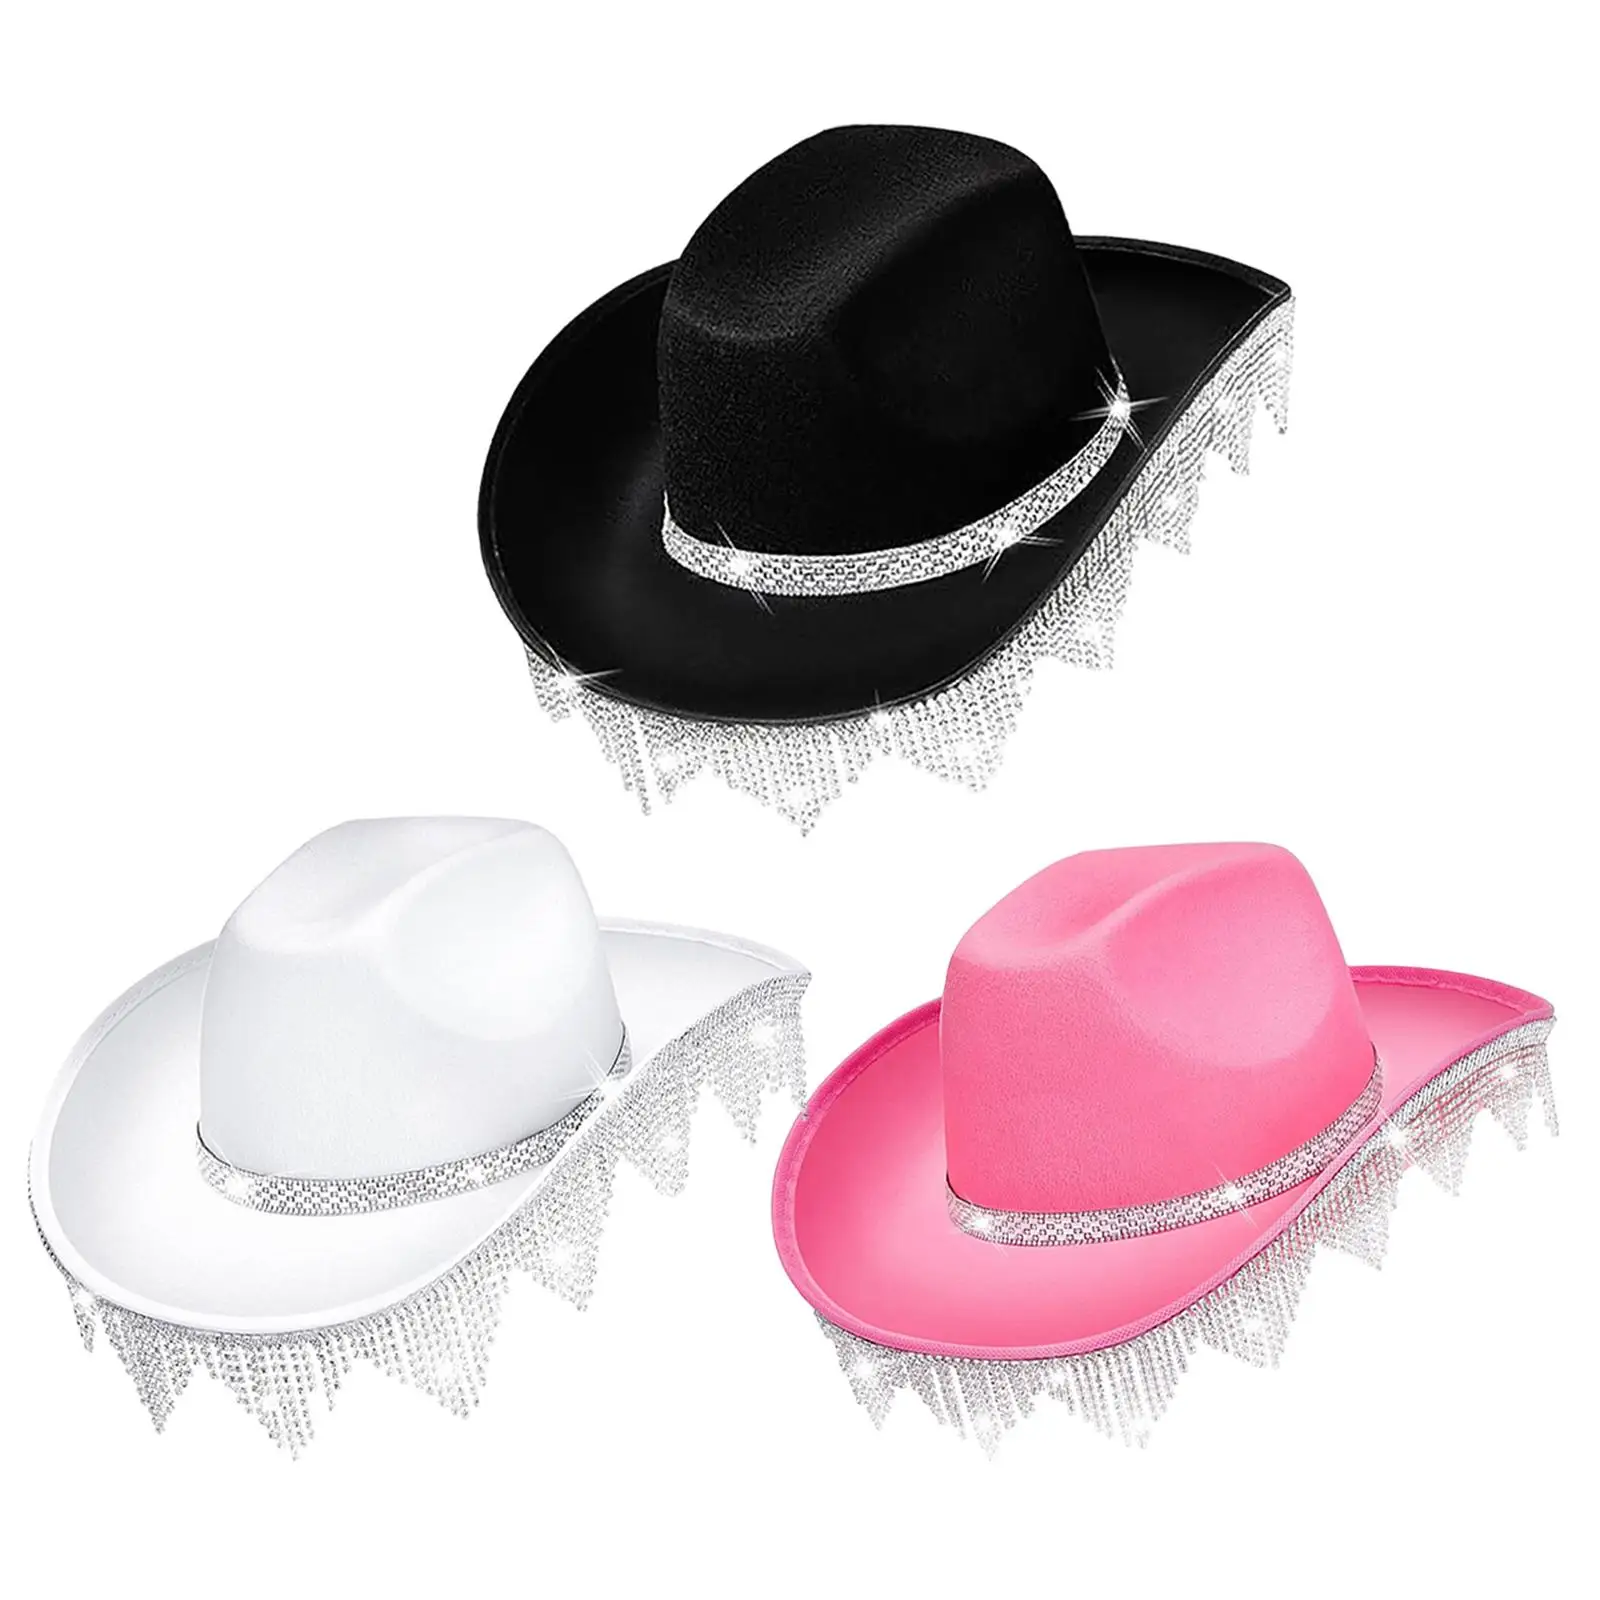 

Tassels Cowboy Hat Versatile Trendy Women Men Sunshade Hat for Masquerade Roles Play Cosplay Dressing up Costume Accessories